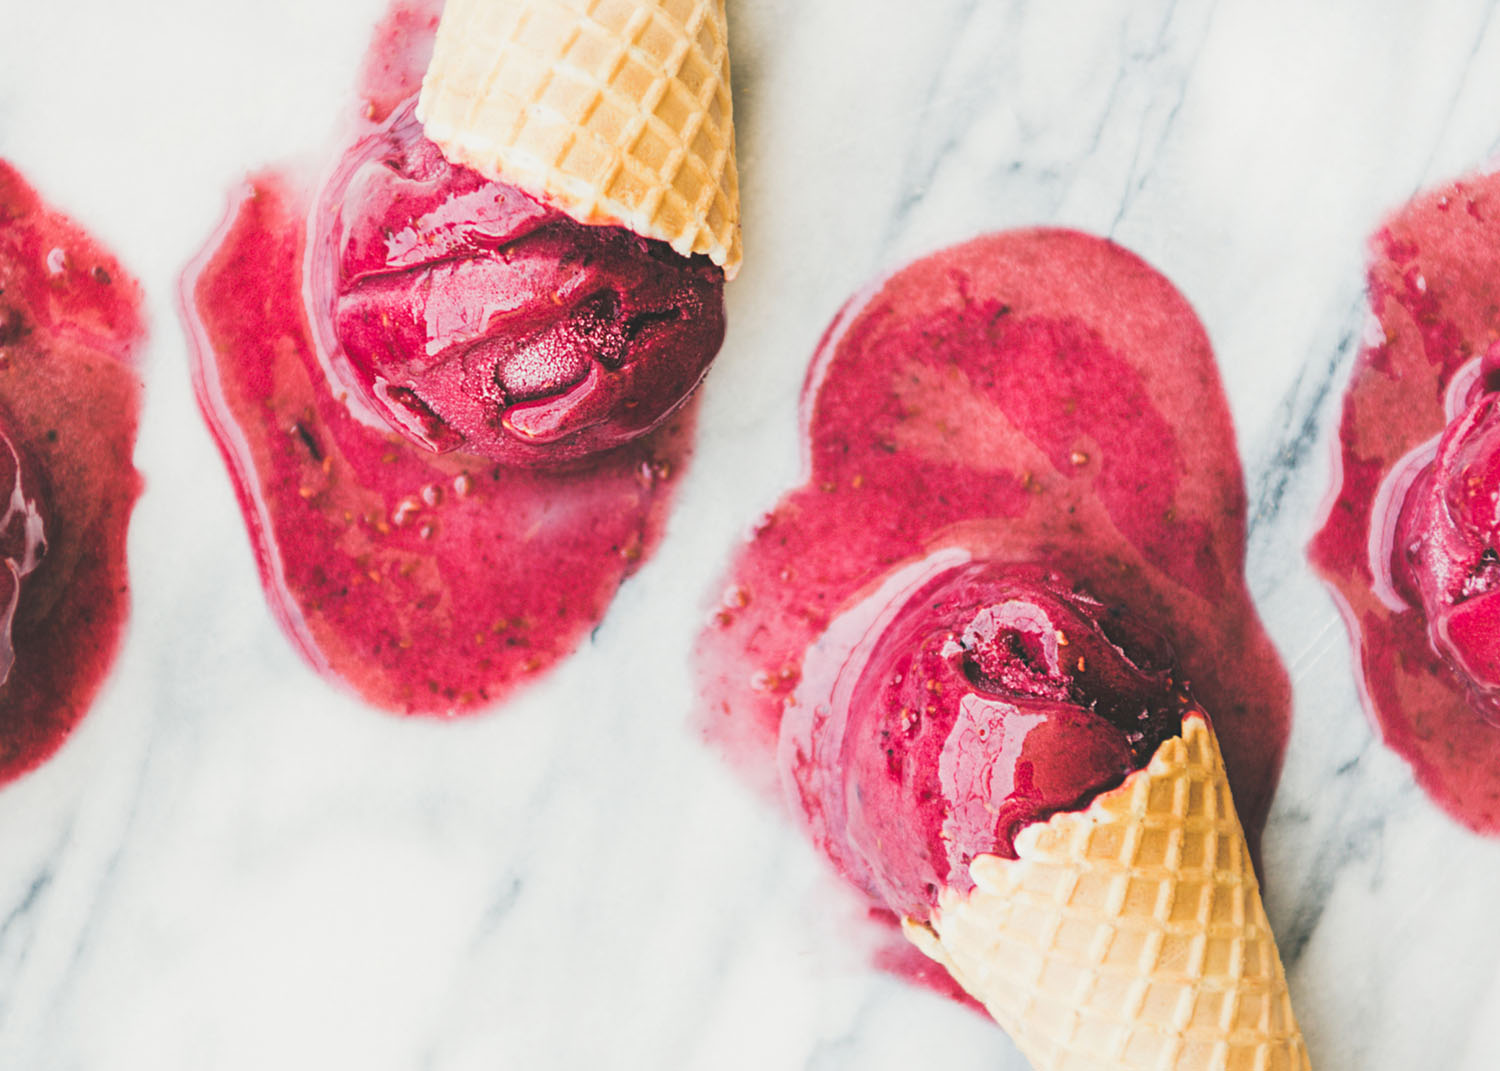 Fresh summer dessert. Flat-lay of red melting natural raspberry sorbet ice-cream scoops in sweet waffle cones over light marble background, top view, close-up. Healthy vegan sweet food